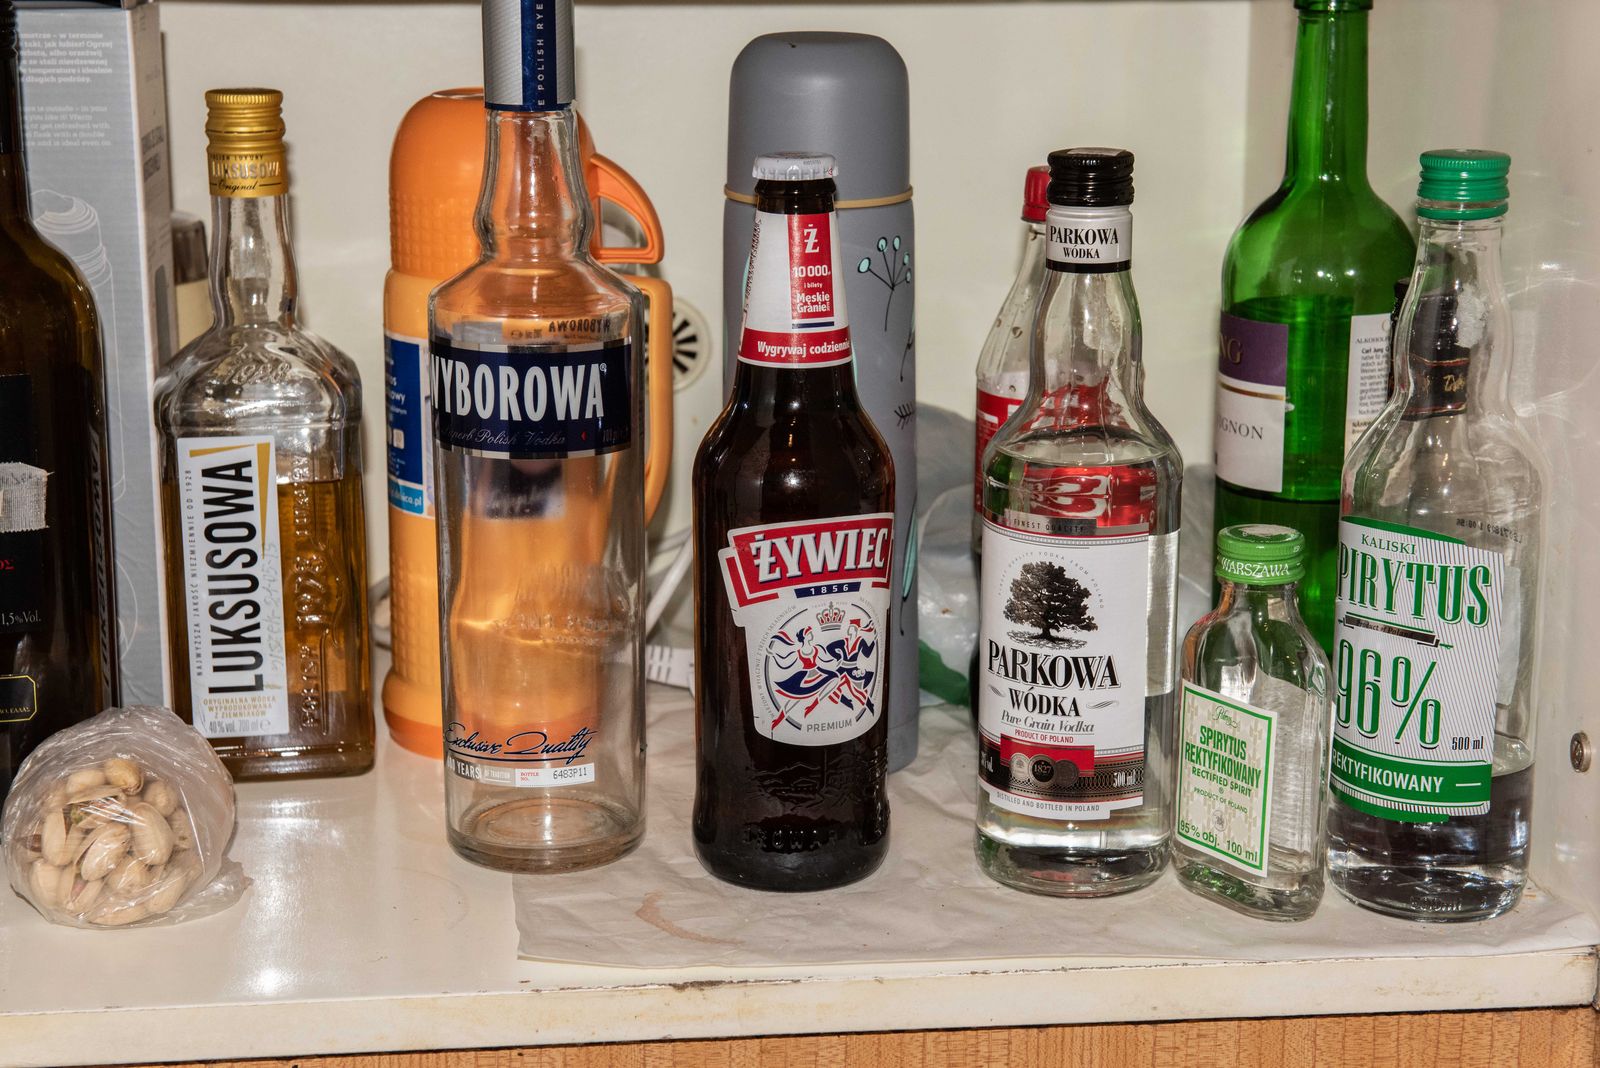 © Zula Rabikowska - A varied selection of vodka and other alcohols in the kitchen.